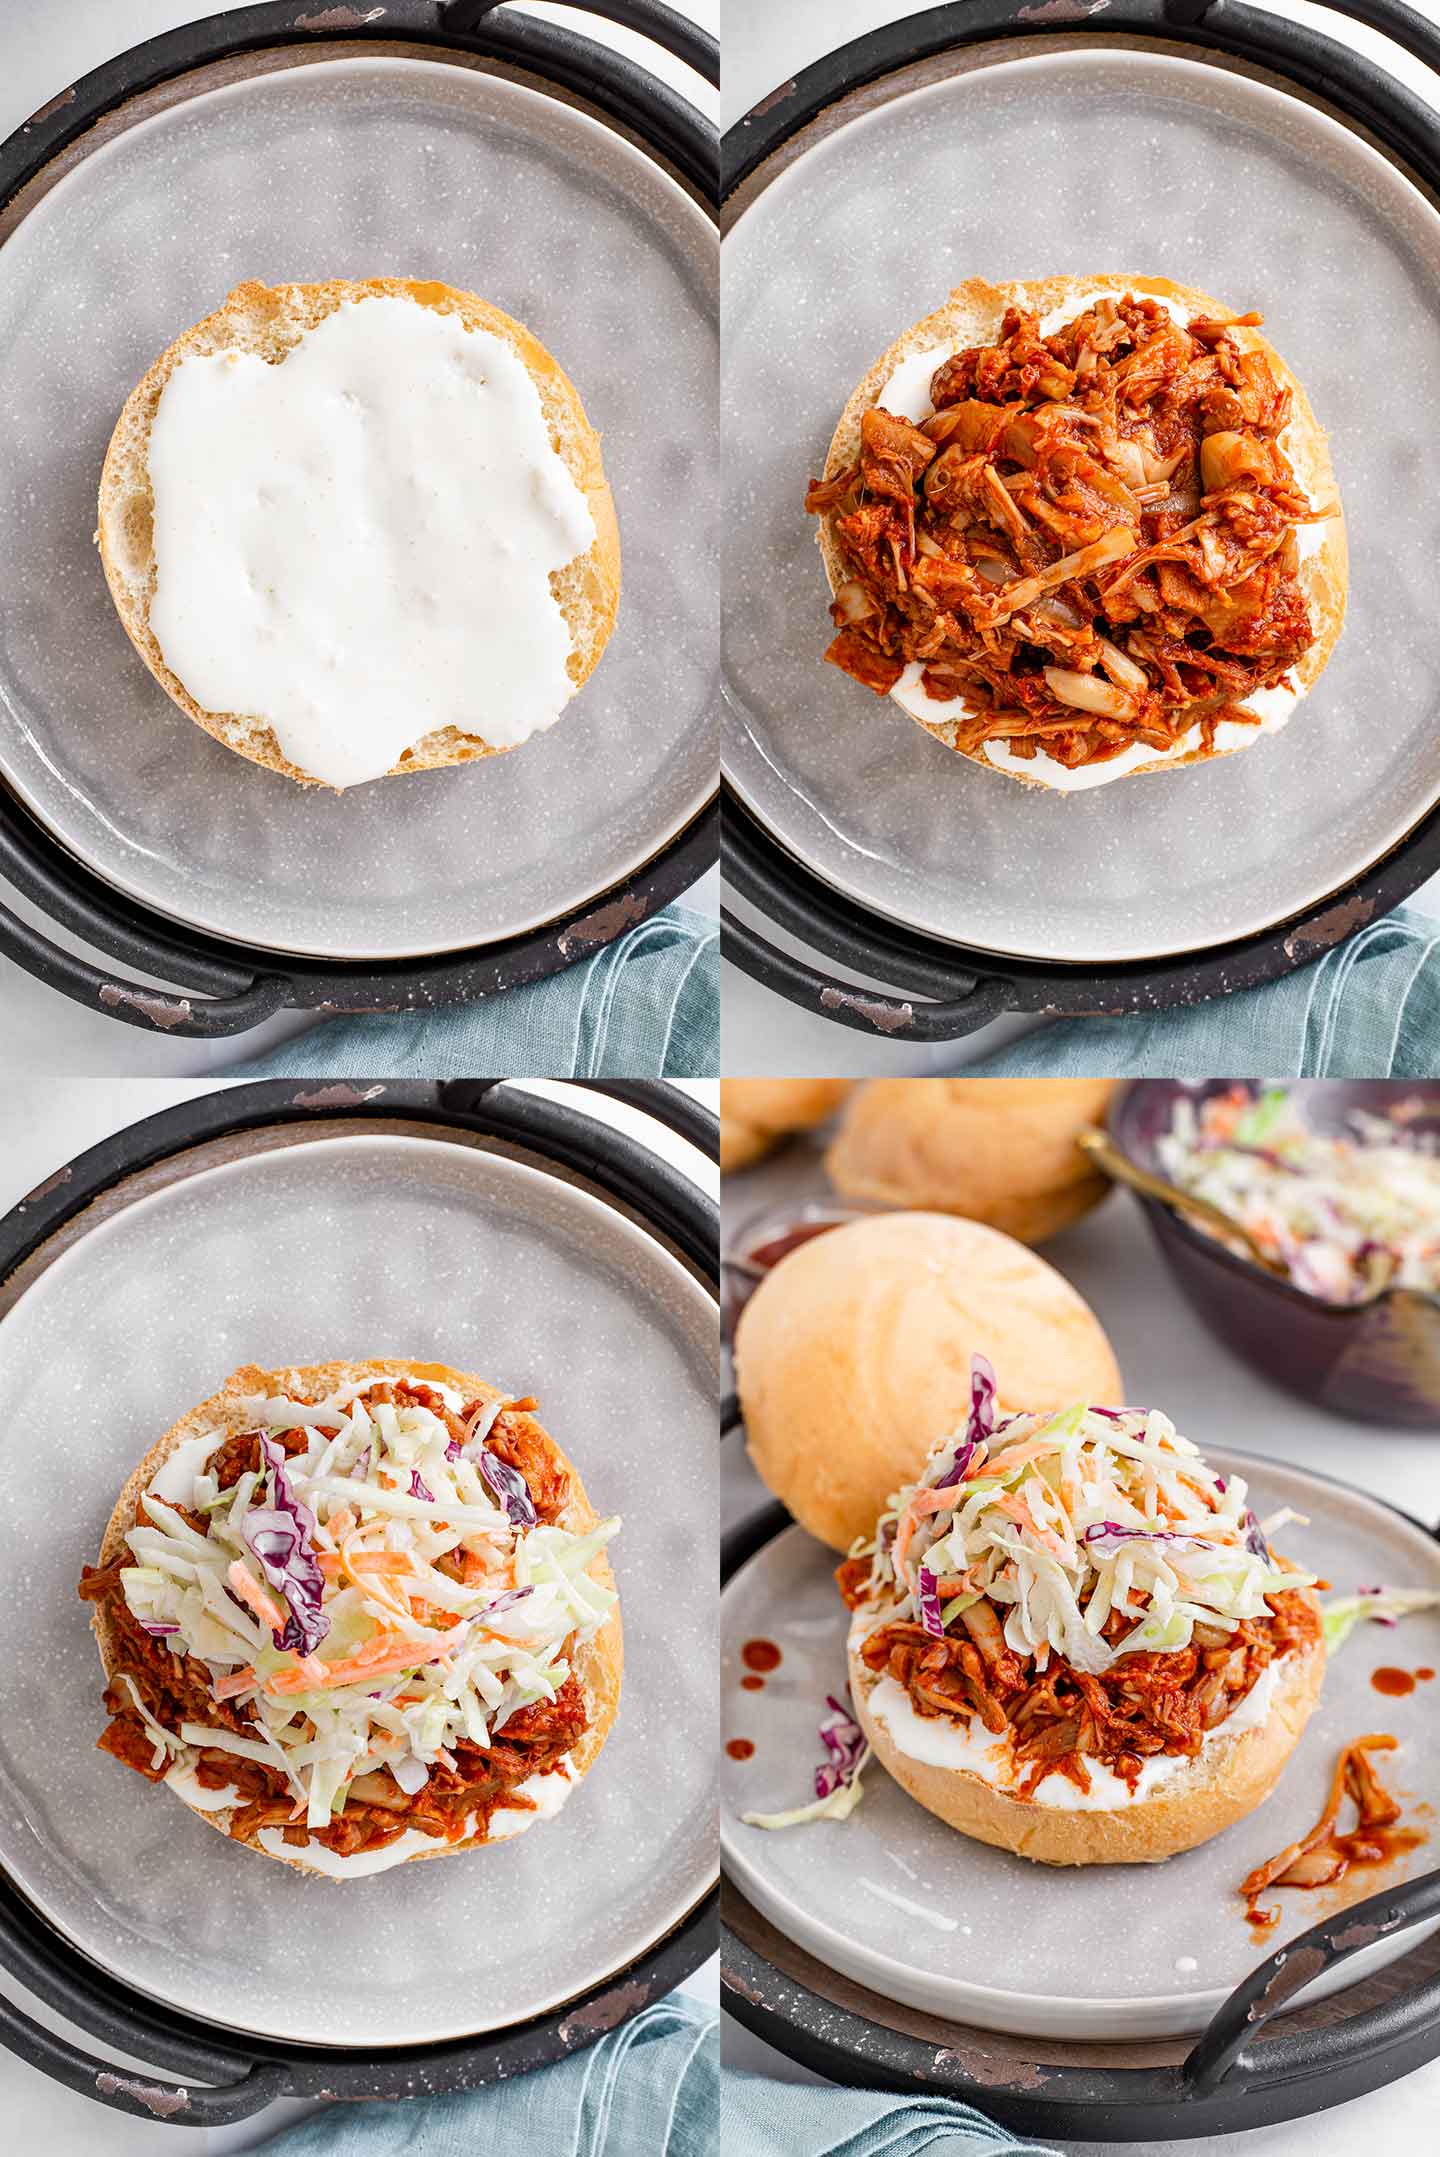 Grid of four top down process photos. Mayonnaise is spread on the bottom bun, BBQ jackfruit is spooned on top, coleslaw covers the jackfruit, and the top bun is placed next to the compiled sandwich.